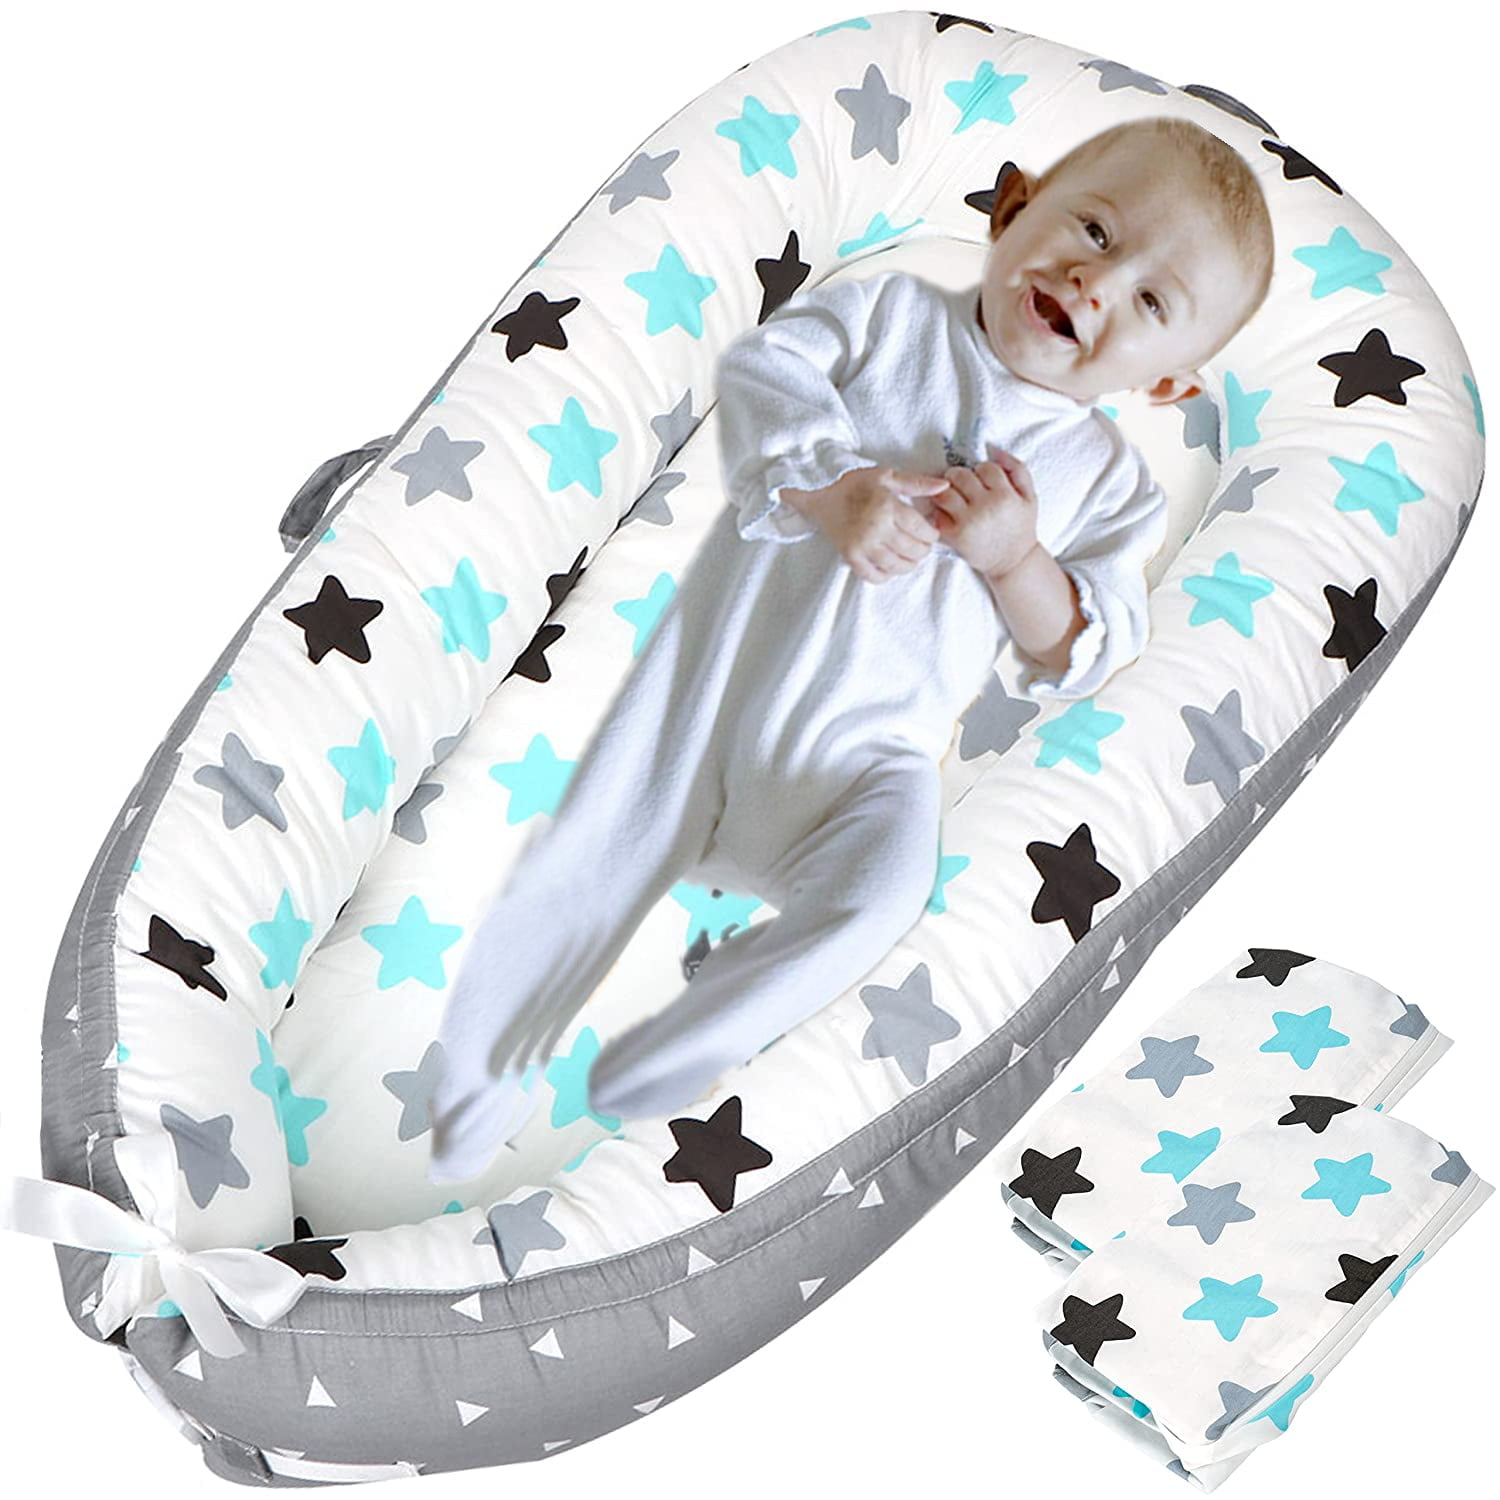 Baby Lounger Baby Nest Portable Co Sleeping Baby Lounger for Crib Bassinet Double-Sided Newborn Nest Bed with Pillow for Napping Traveling Leaves 